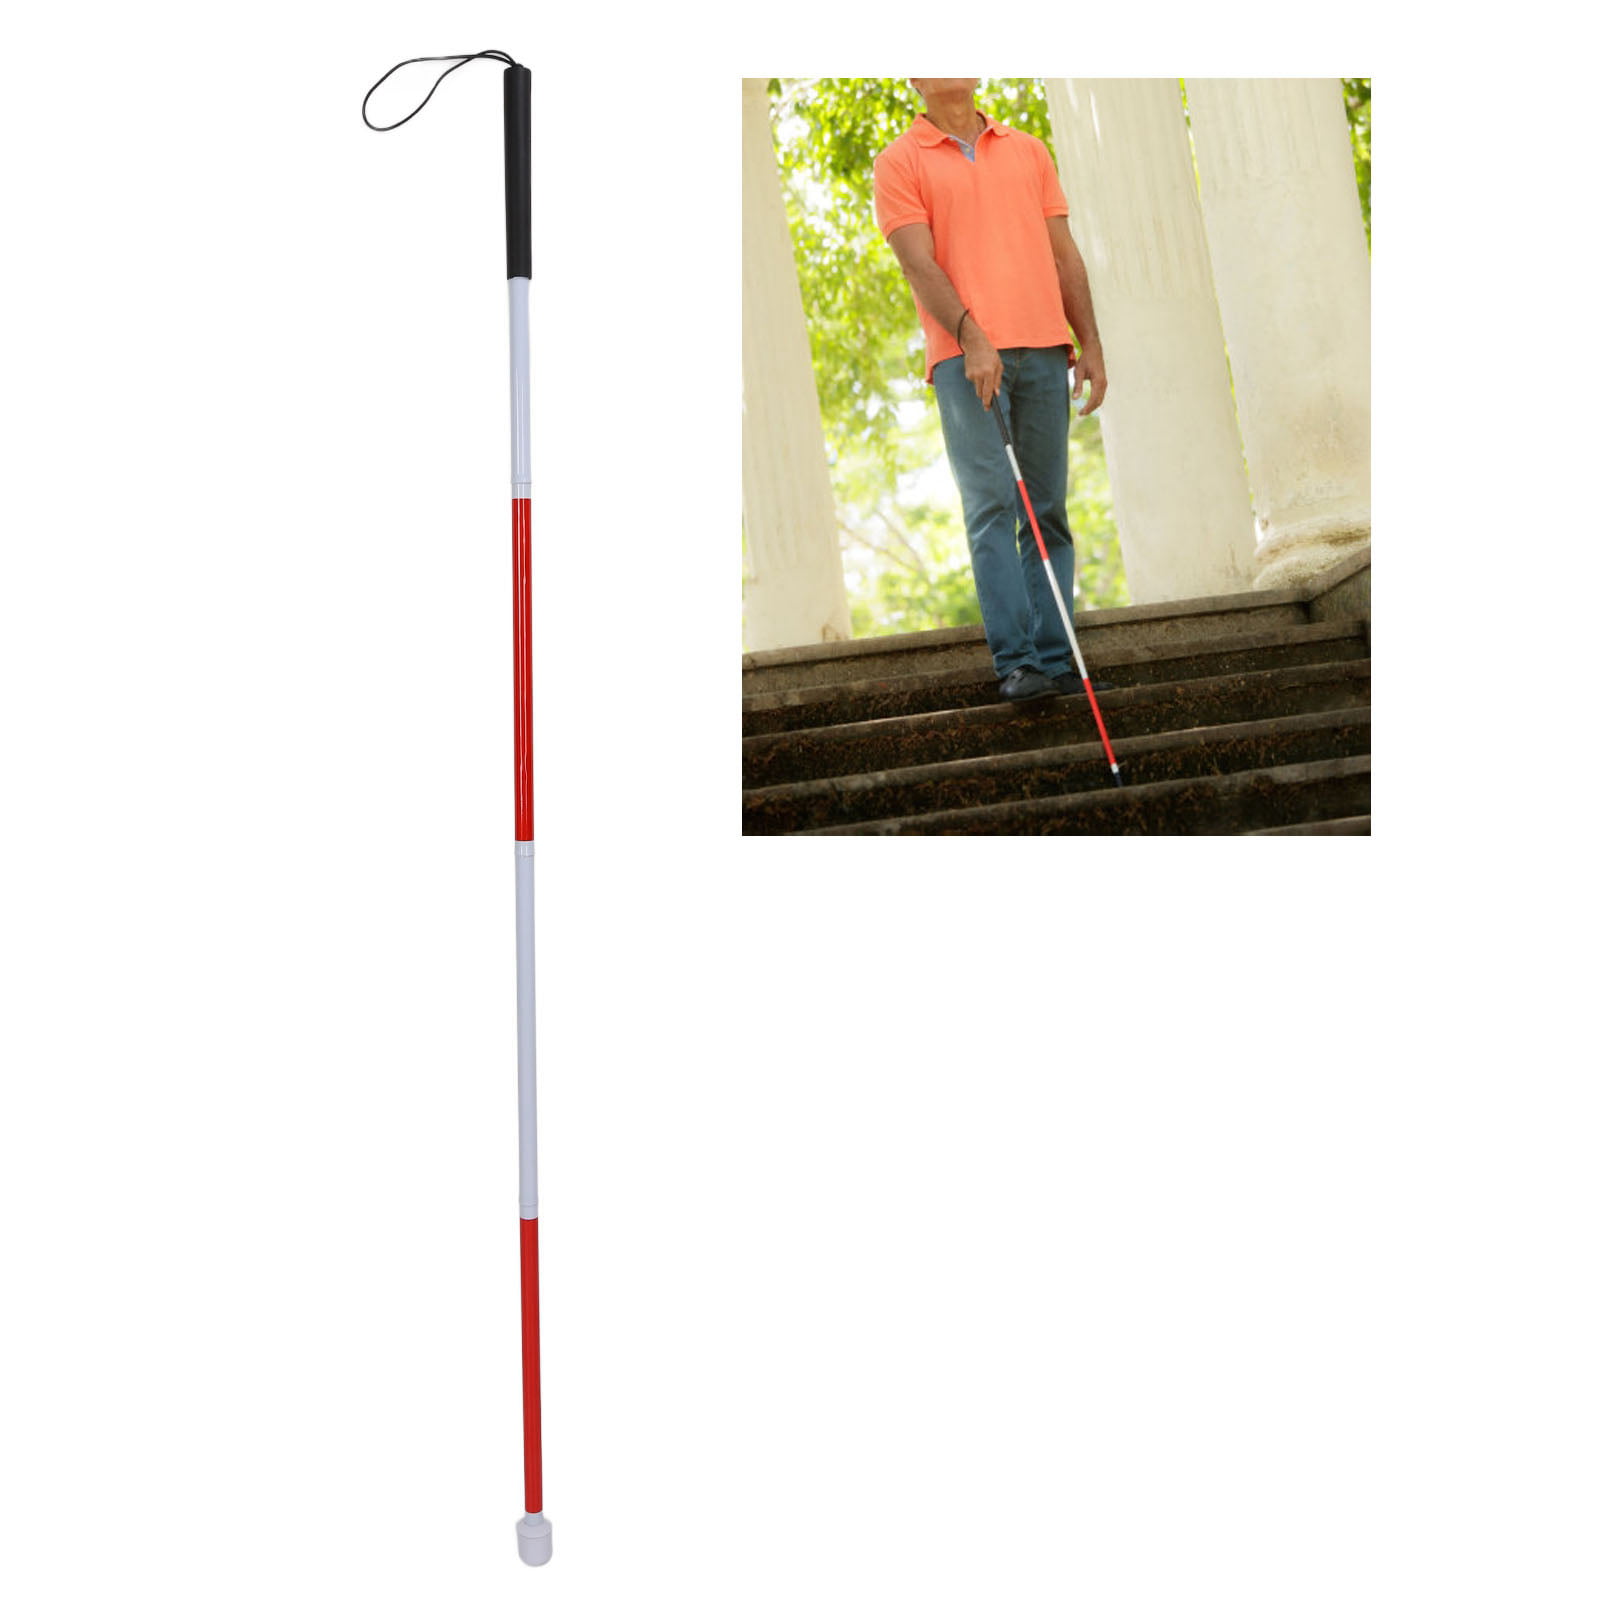 Aluminum Folding Cane, Anti-Slip Walking Stick for Blind Night Reflective  Best Mobility Crutch for Vision Impaired Fold Canes Walk Sticks Blind